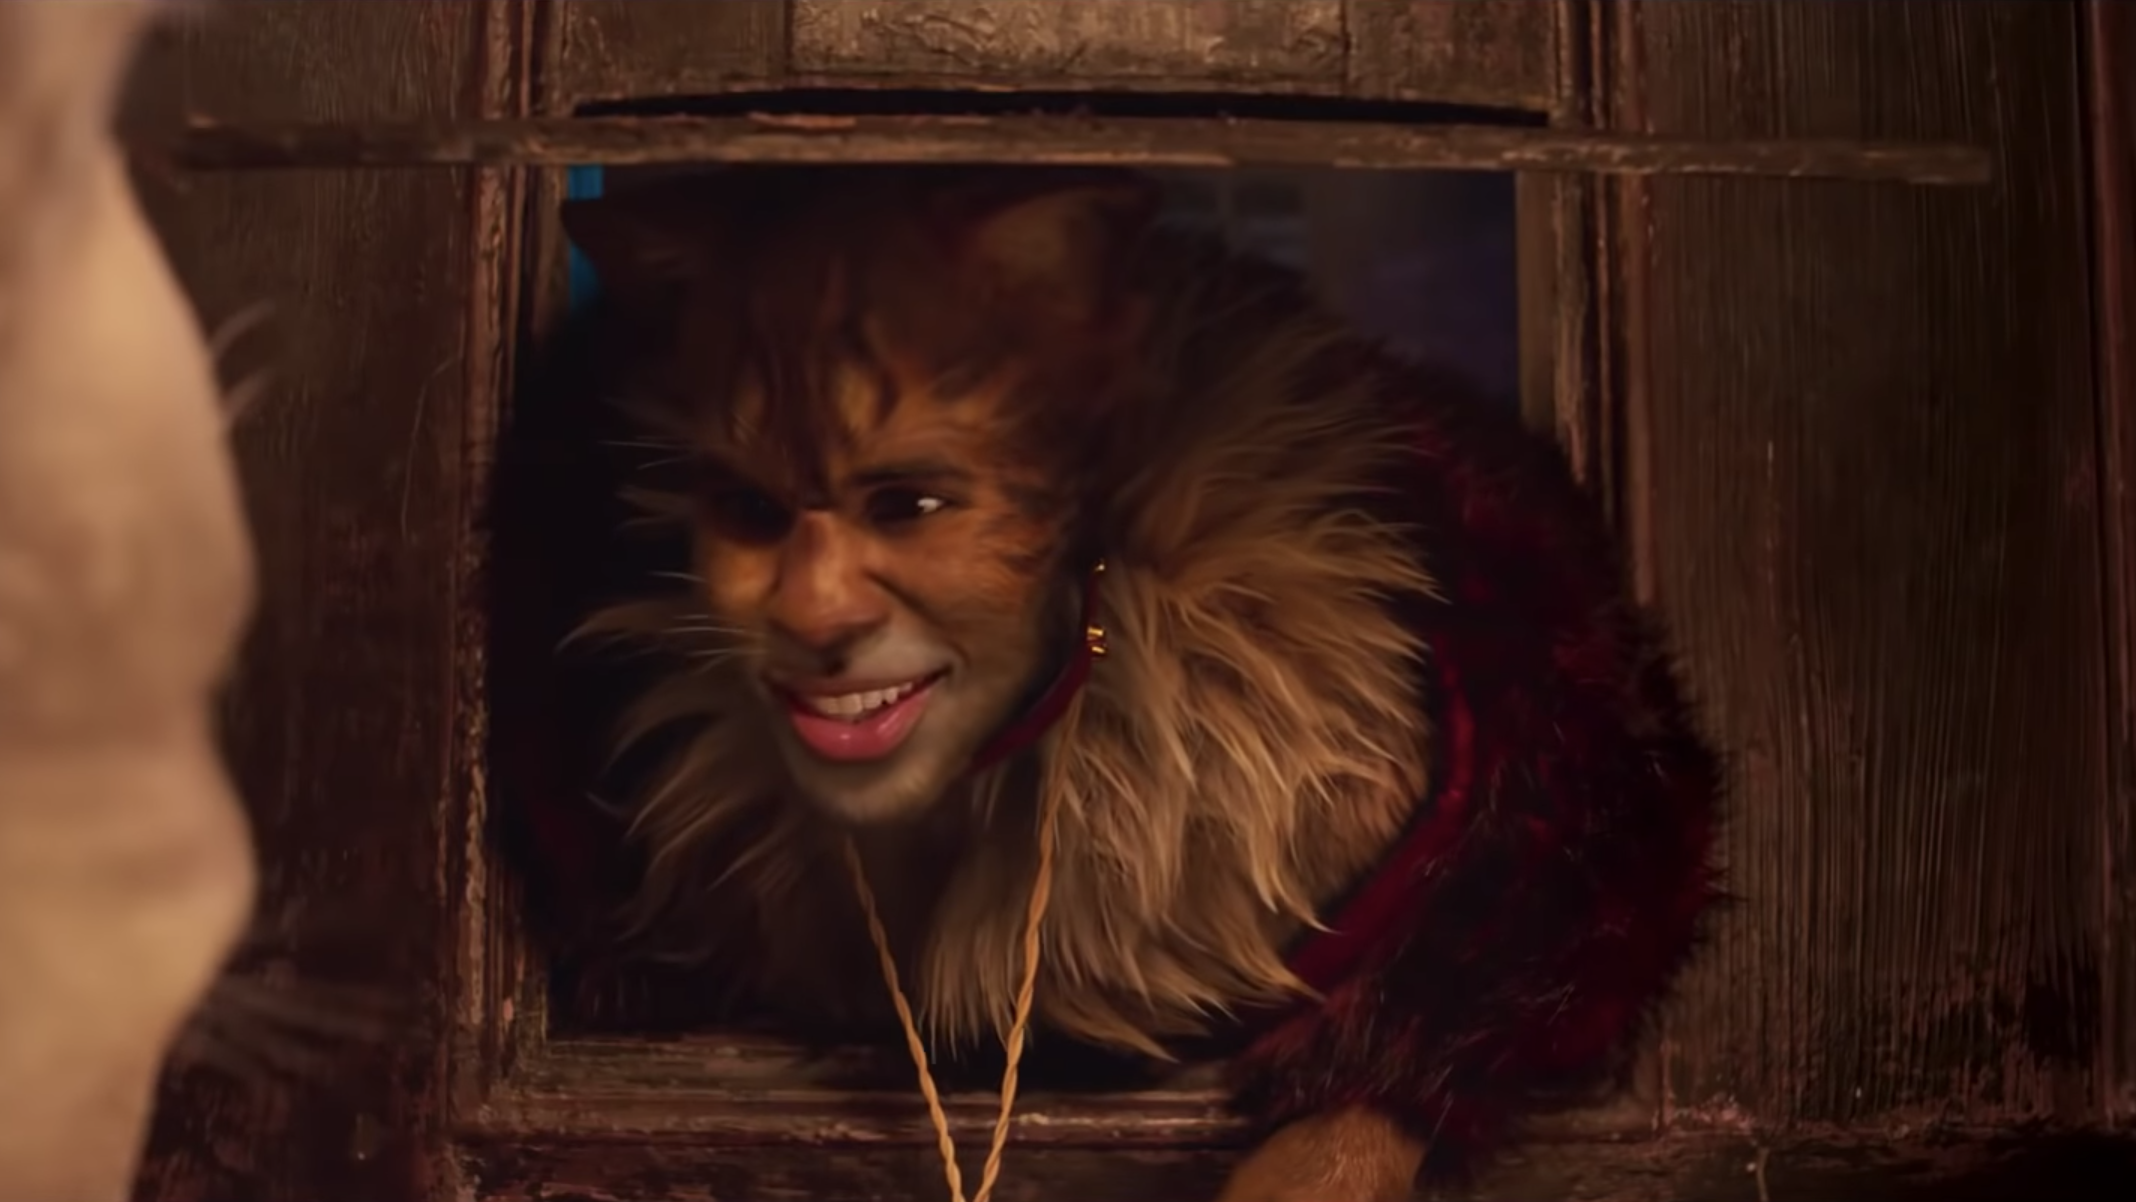 Critics Hate 'Cats': Here Are The Most Vicious Movie Reviews